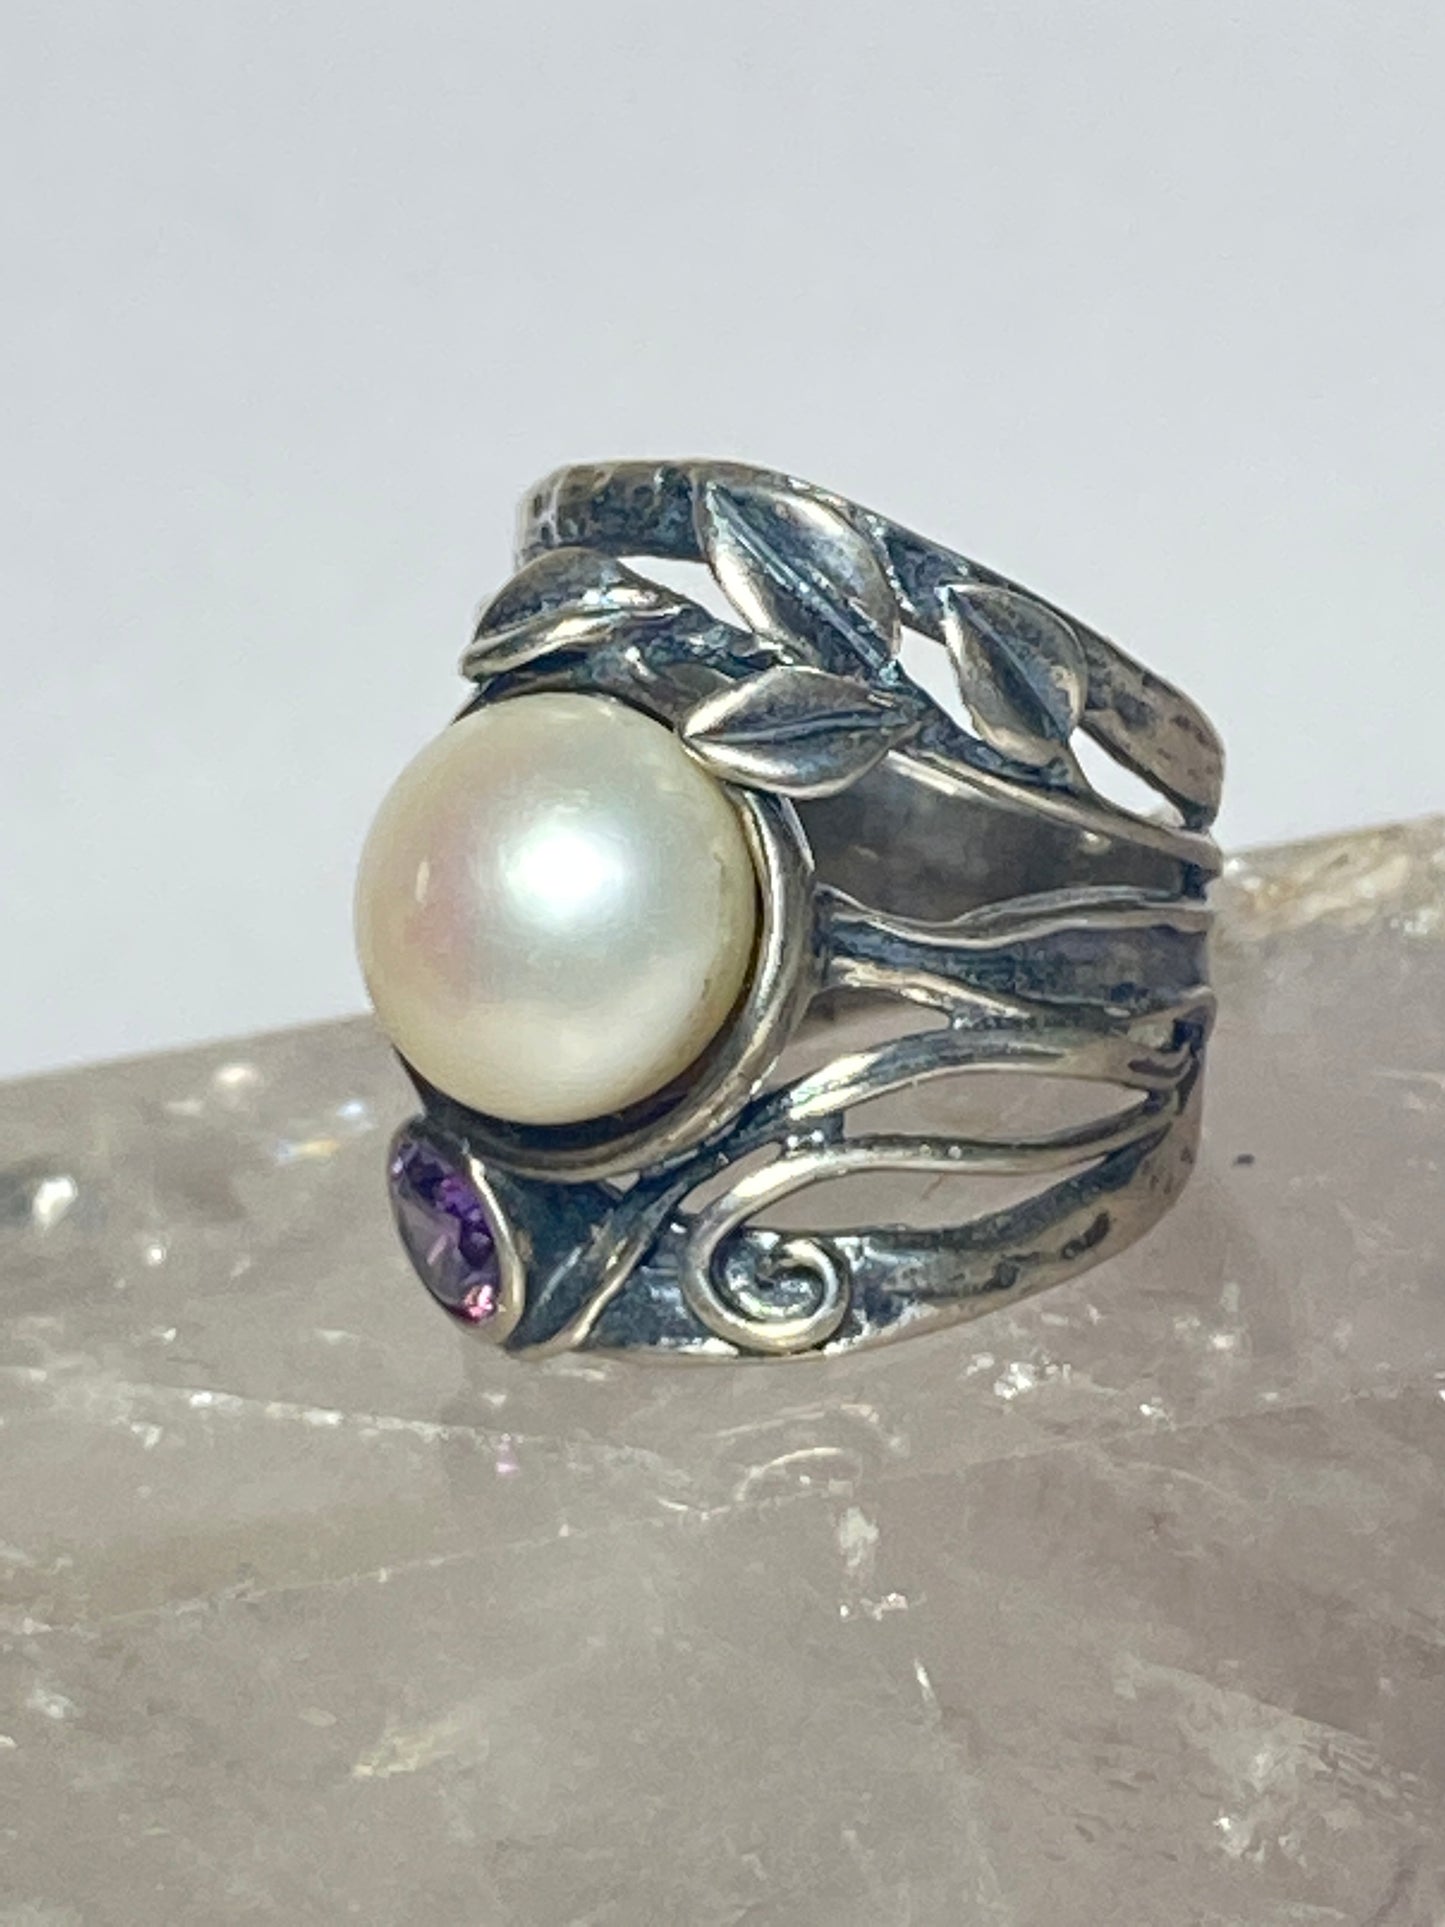 Cigar band size 6.50 floral ring  pearl sterling silver Didae women